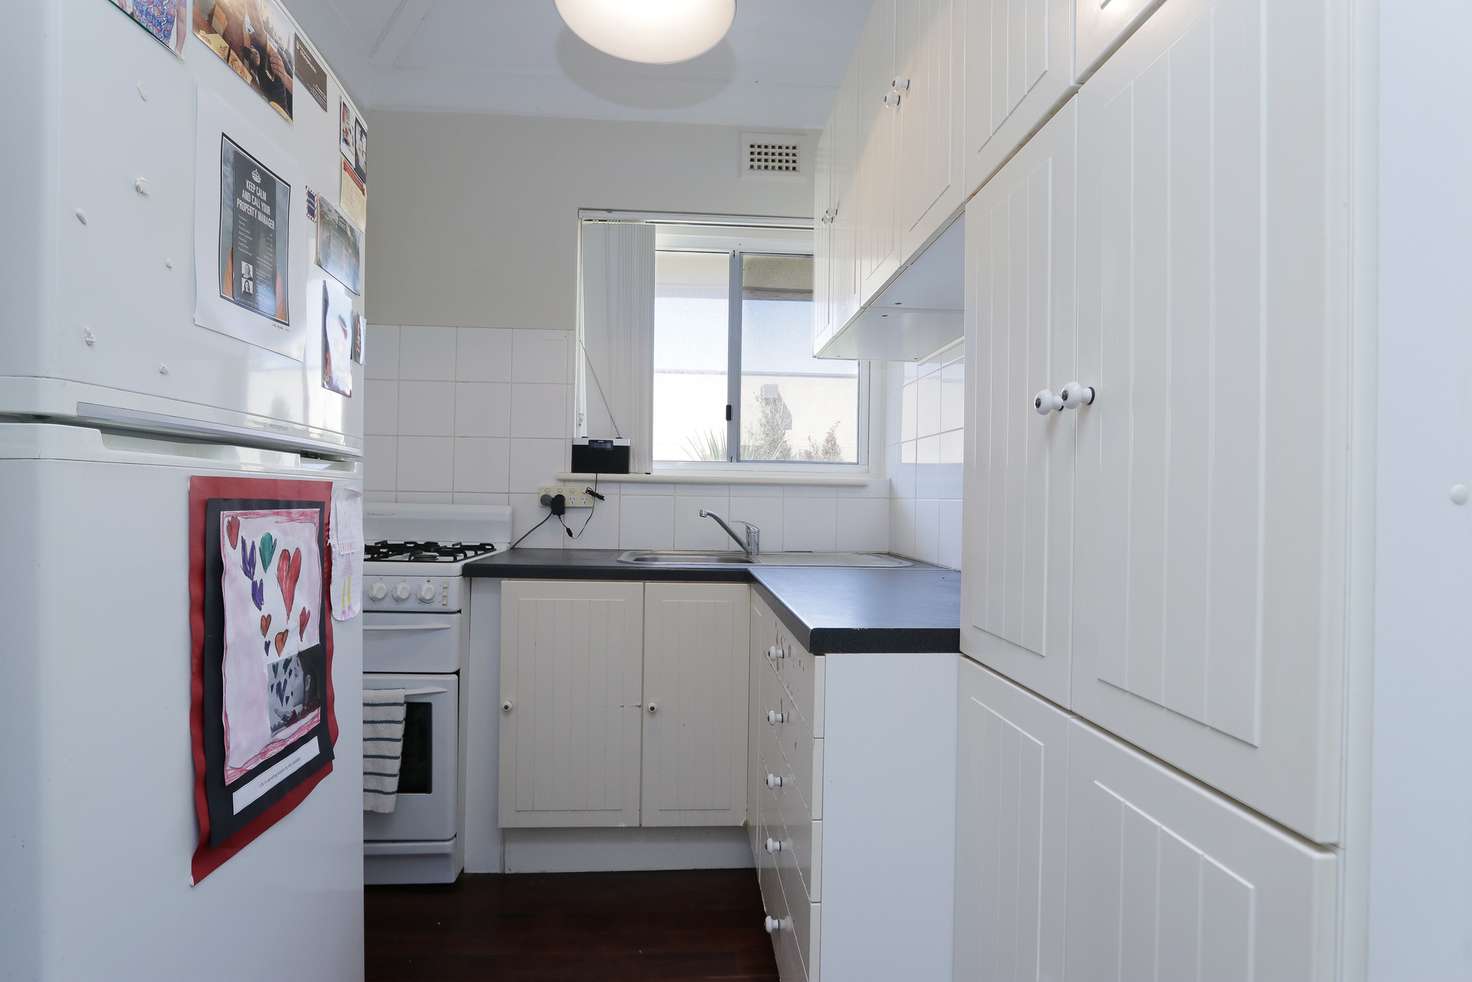 Main view of Homely apartment listing, 24/15 Eric Street, Cottesloe WA 6011